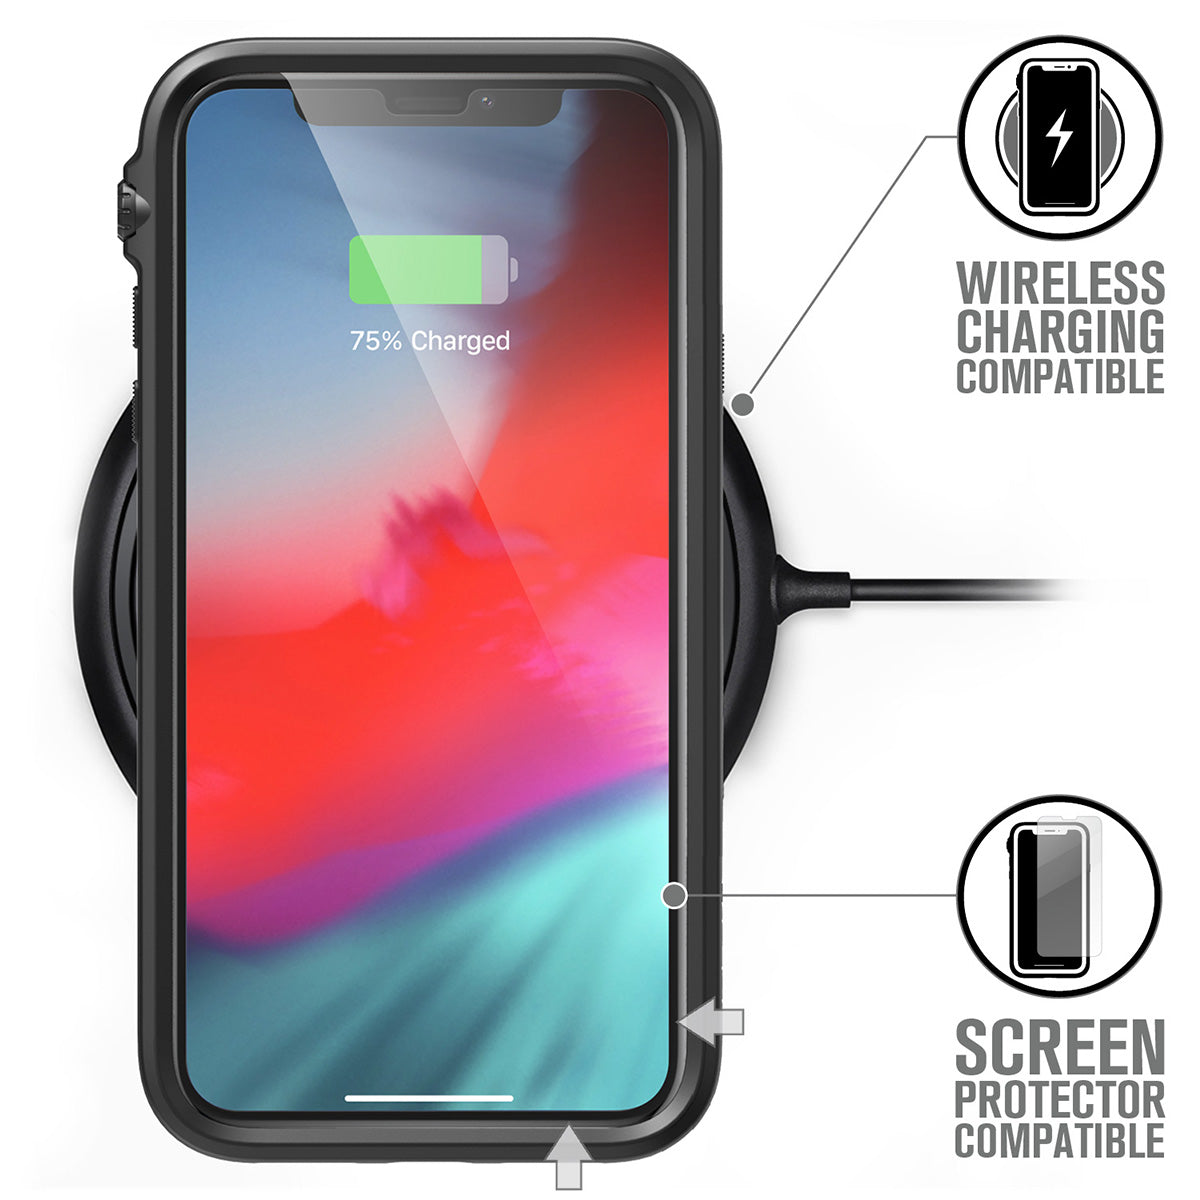 Catalyst Impact Protection Case for iPhone X/XR/Xs/Xs Max showing the iphone screen with the catalyst case installed on a wireless charger text reads wireless chaging compatible screen protector compatible